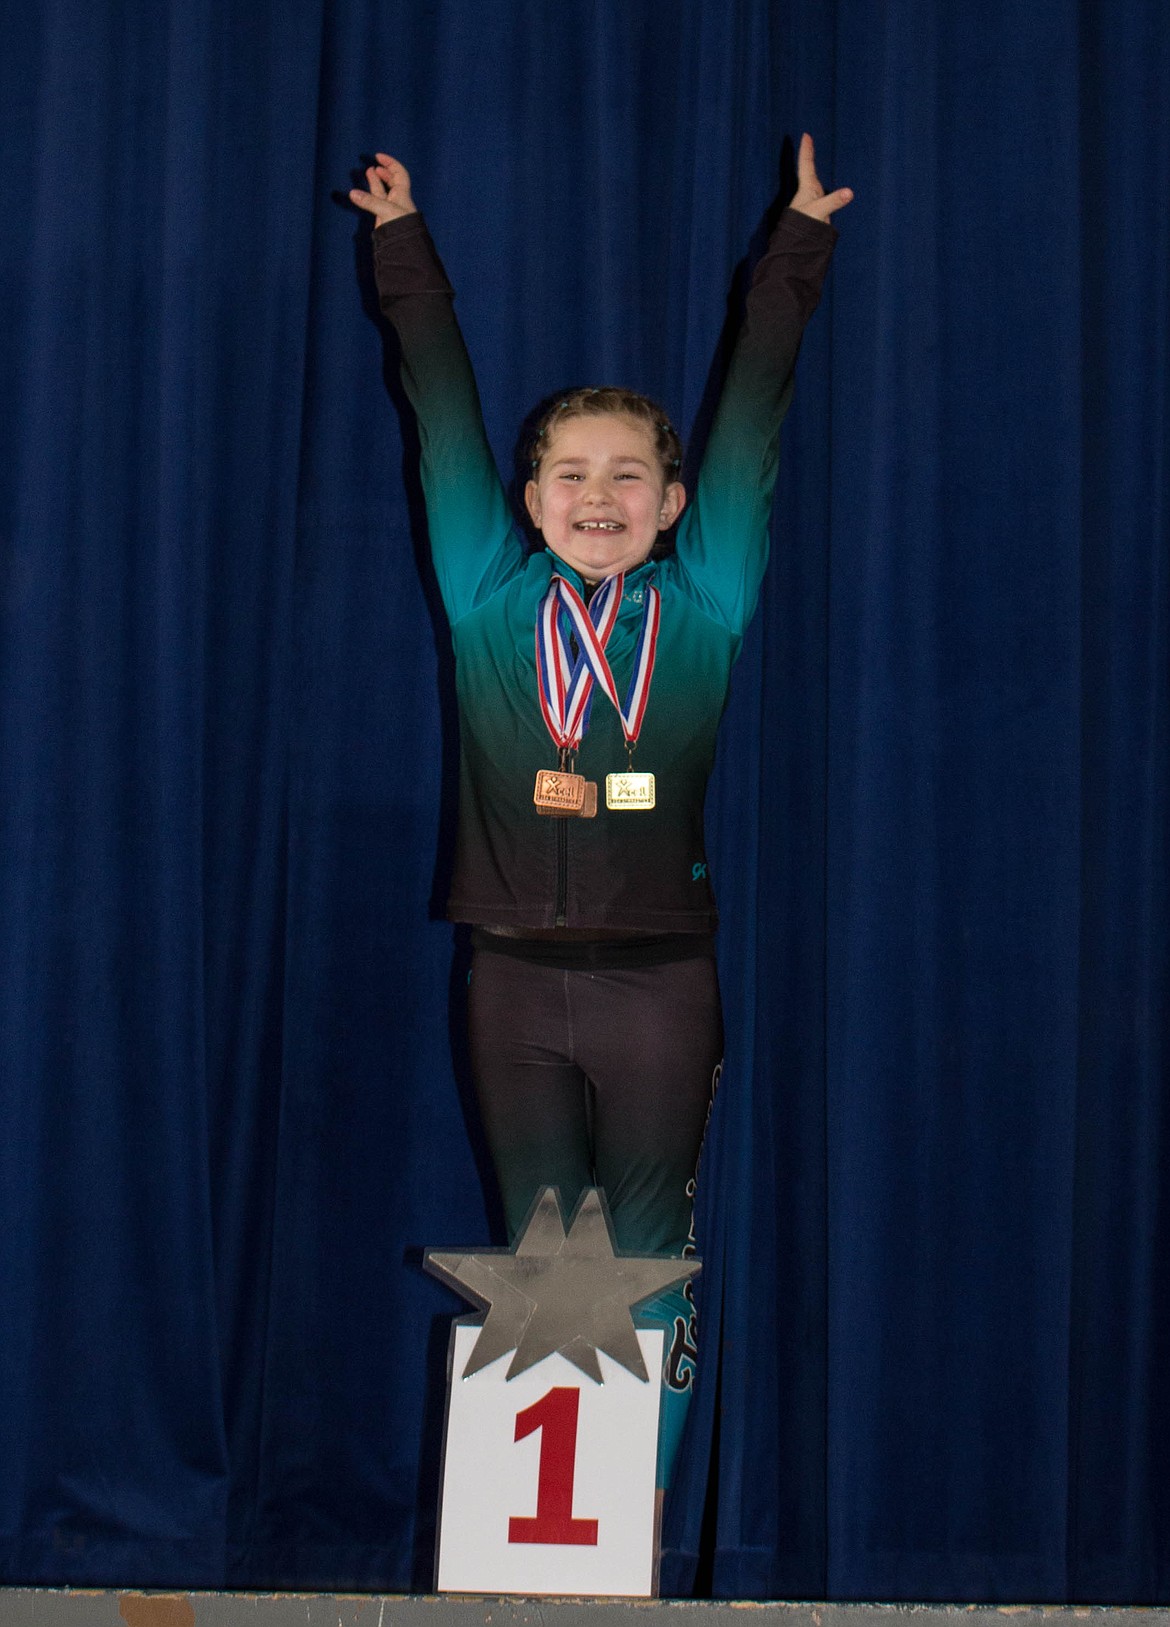 Courtesy photo
Tatum Easterday of Technique Gymnastics won the Xcel Silver Floor title at the recent Xcel state championships in Meridian.